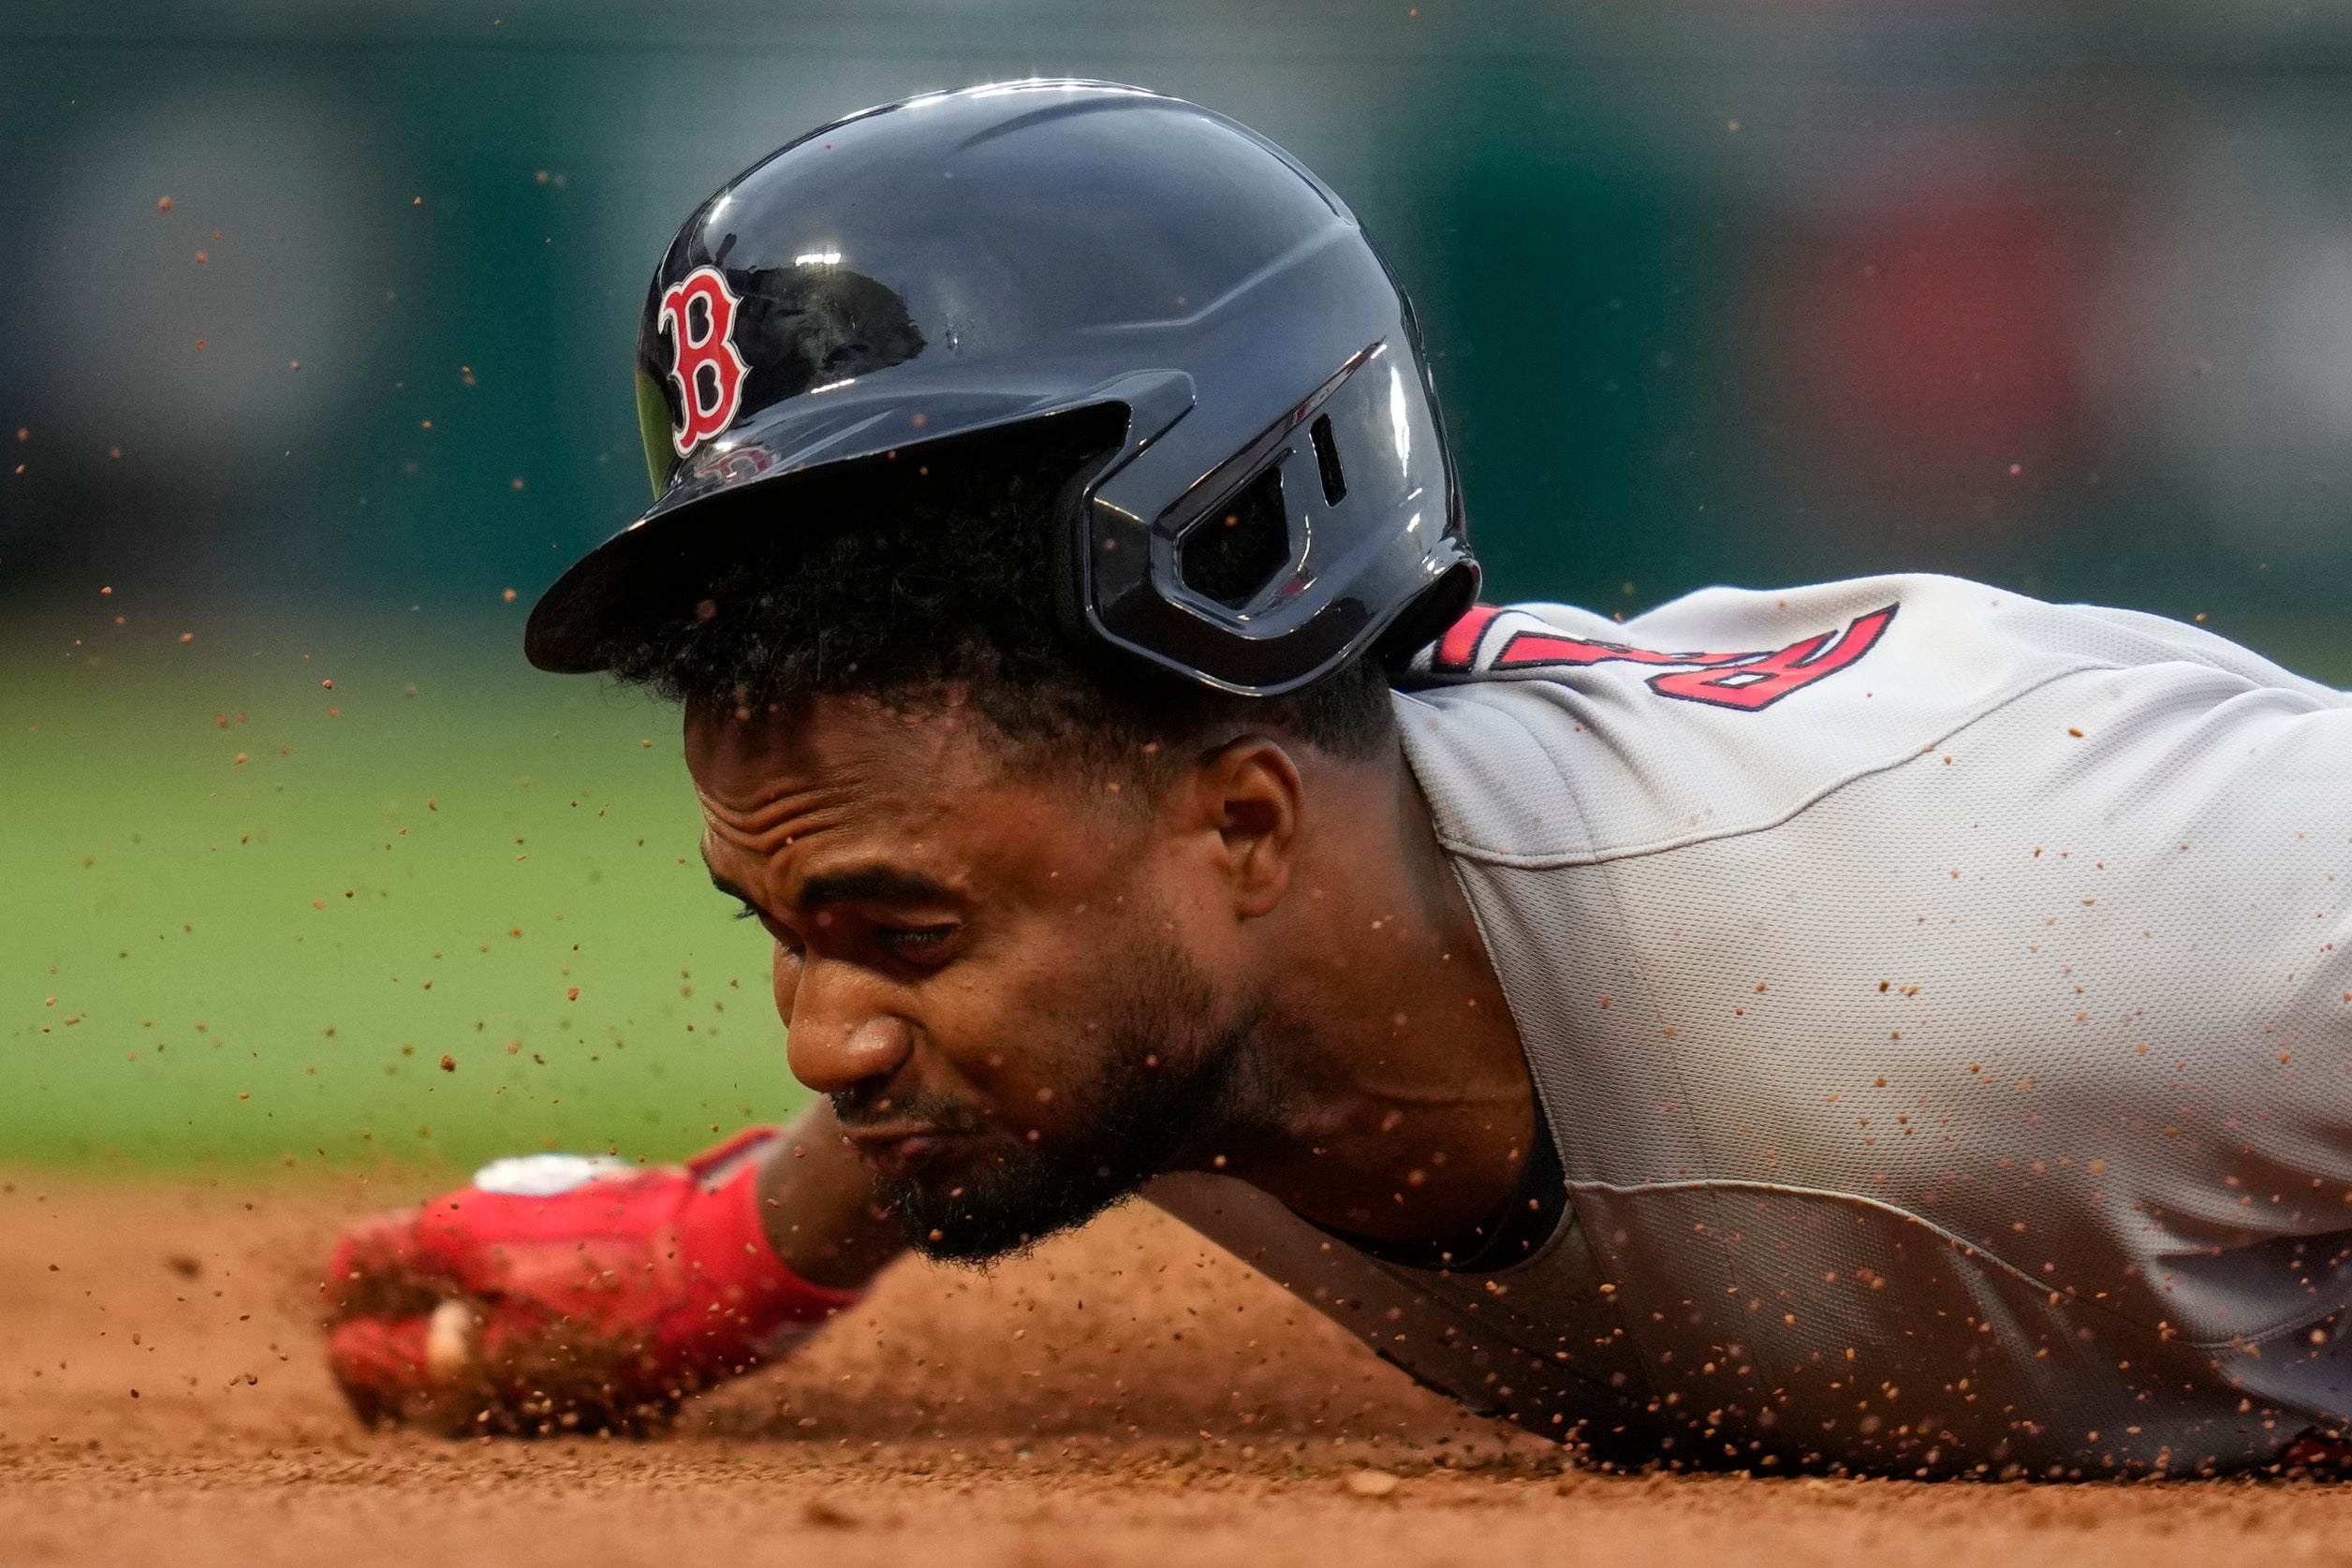 Pablo Reyes grimaces up close as he dives back into first base.